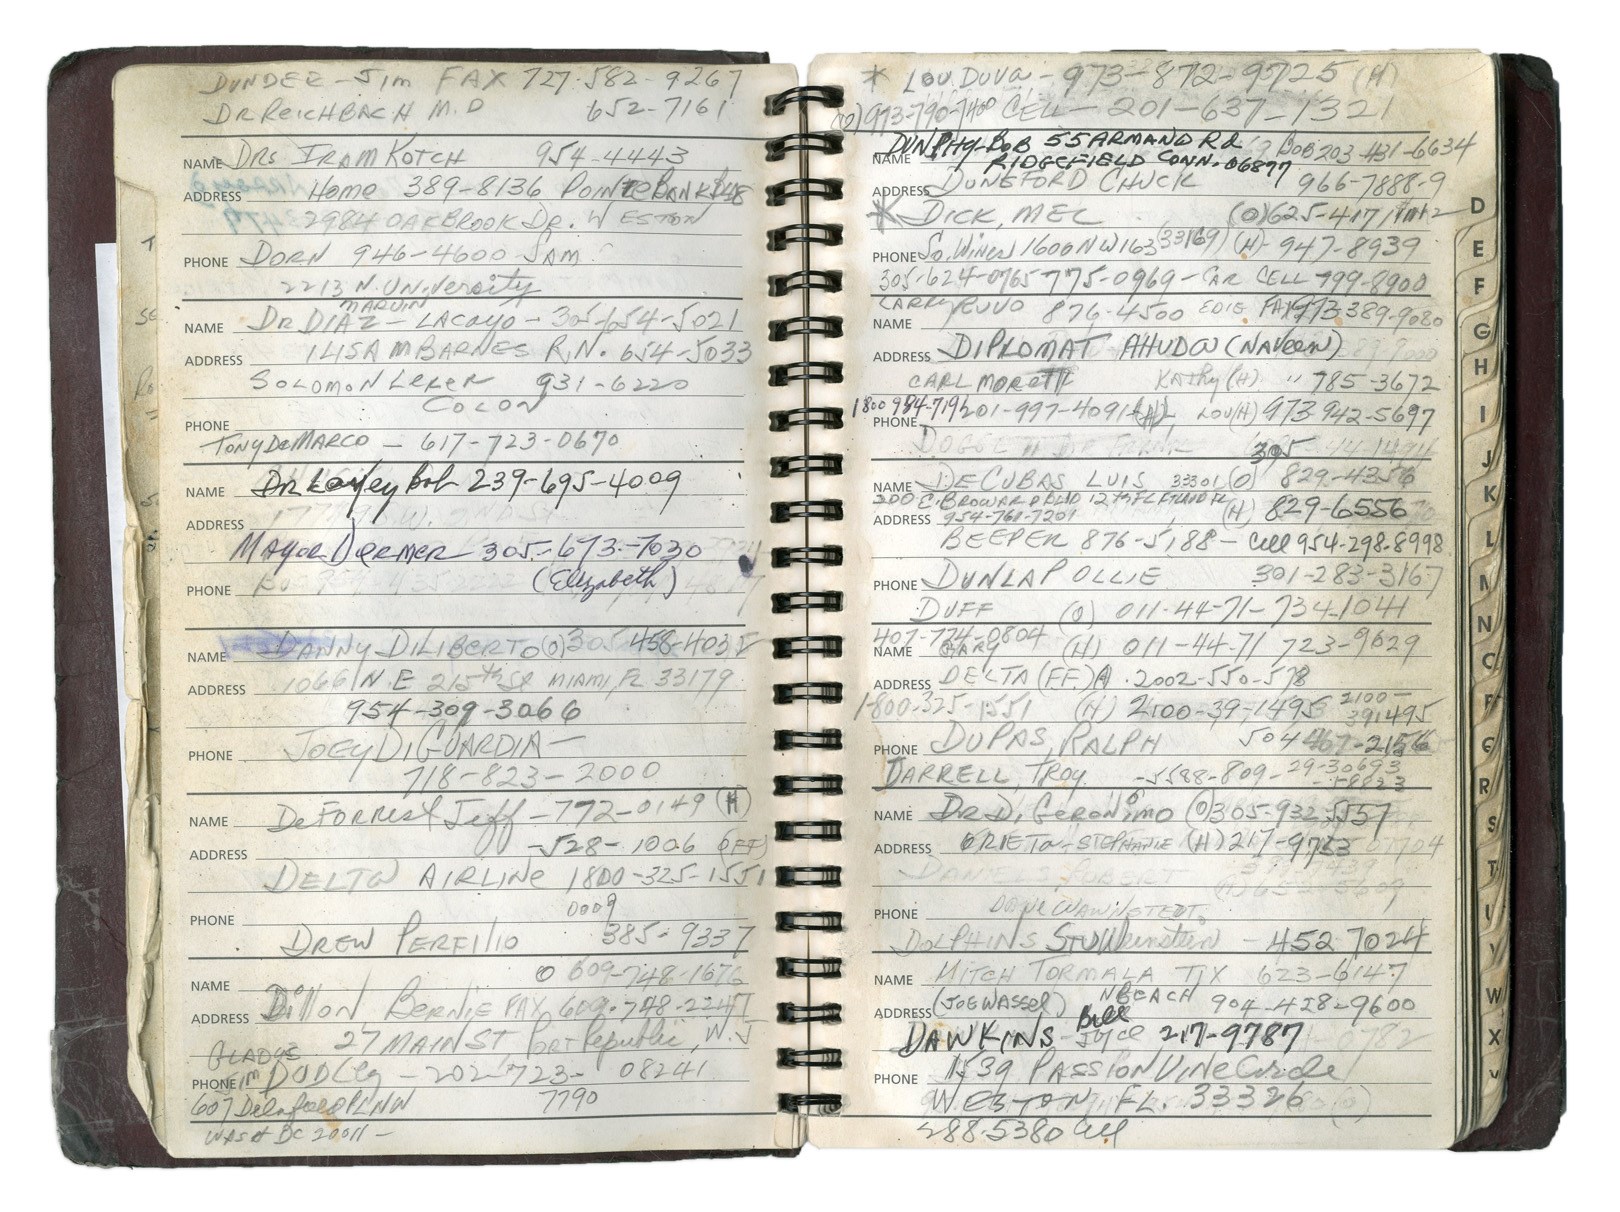 Muhammad Ali & Boxing - Angelo Dundee's Personal Address Book with Muhammad Ali Content (Dundee LOA)